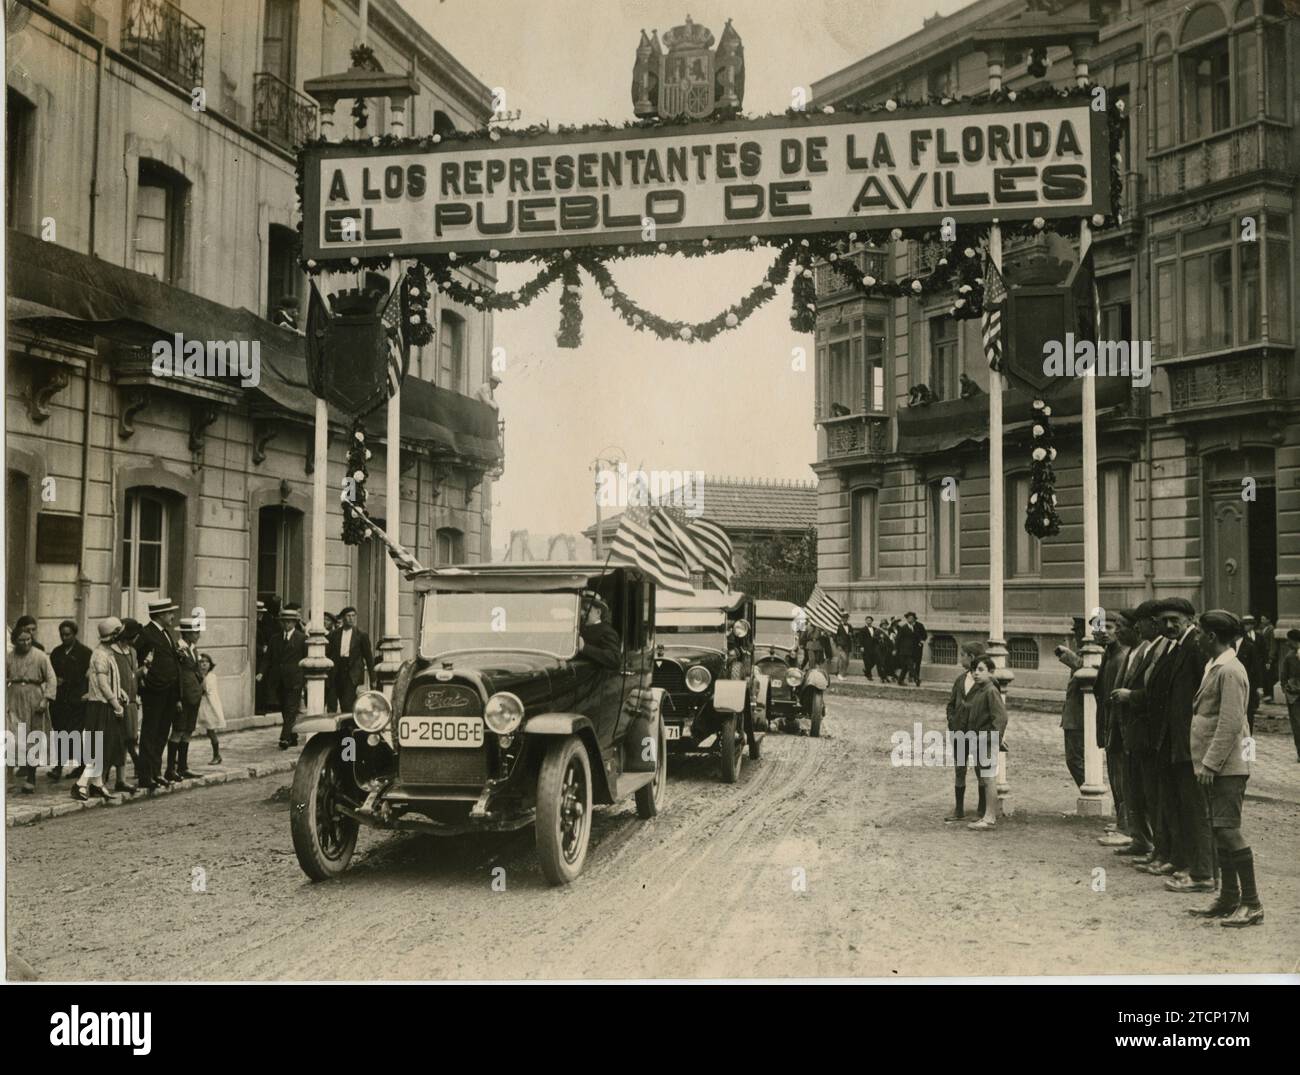 Avilés, August 1924. The arrival of the North American commissioners. The automobiles occupied by the illustrious travelers as they pass under the arch raised in honor of these. Credit: Album / Archivo ABC / Pío Stock Photo